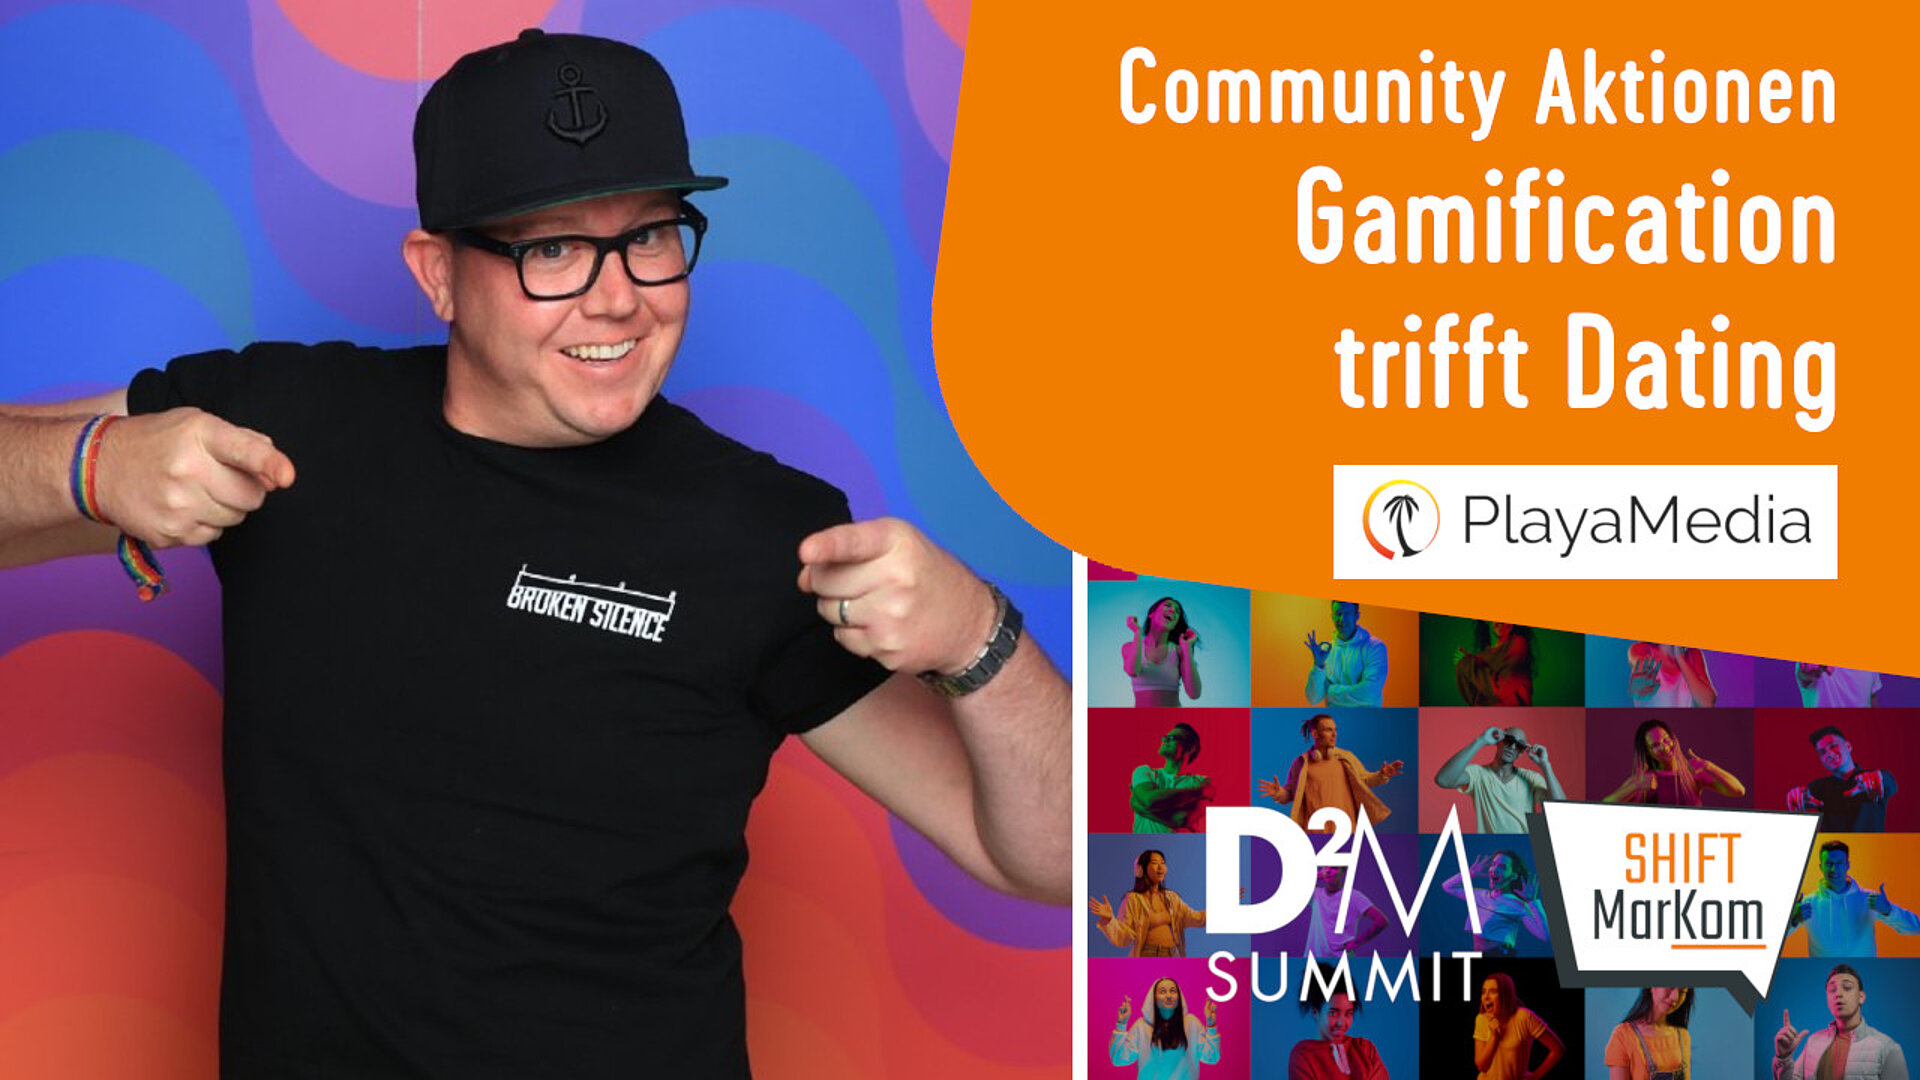 Community Aktionen - Gamification trifft Dating